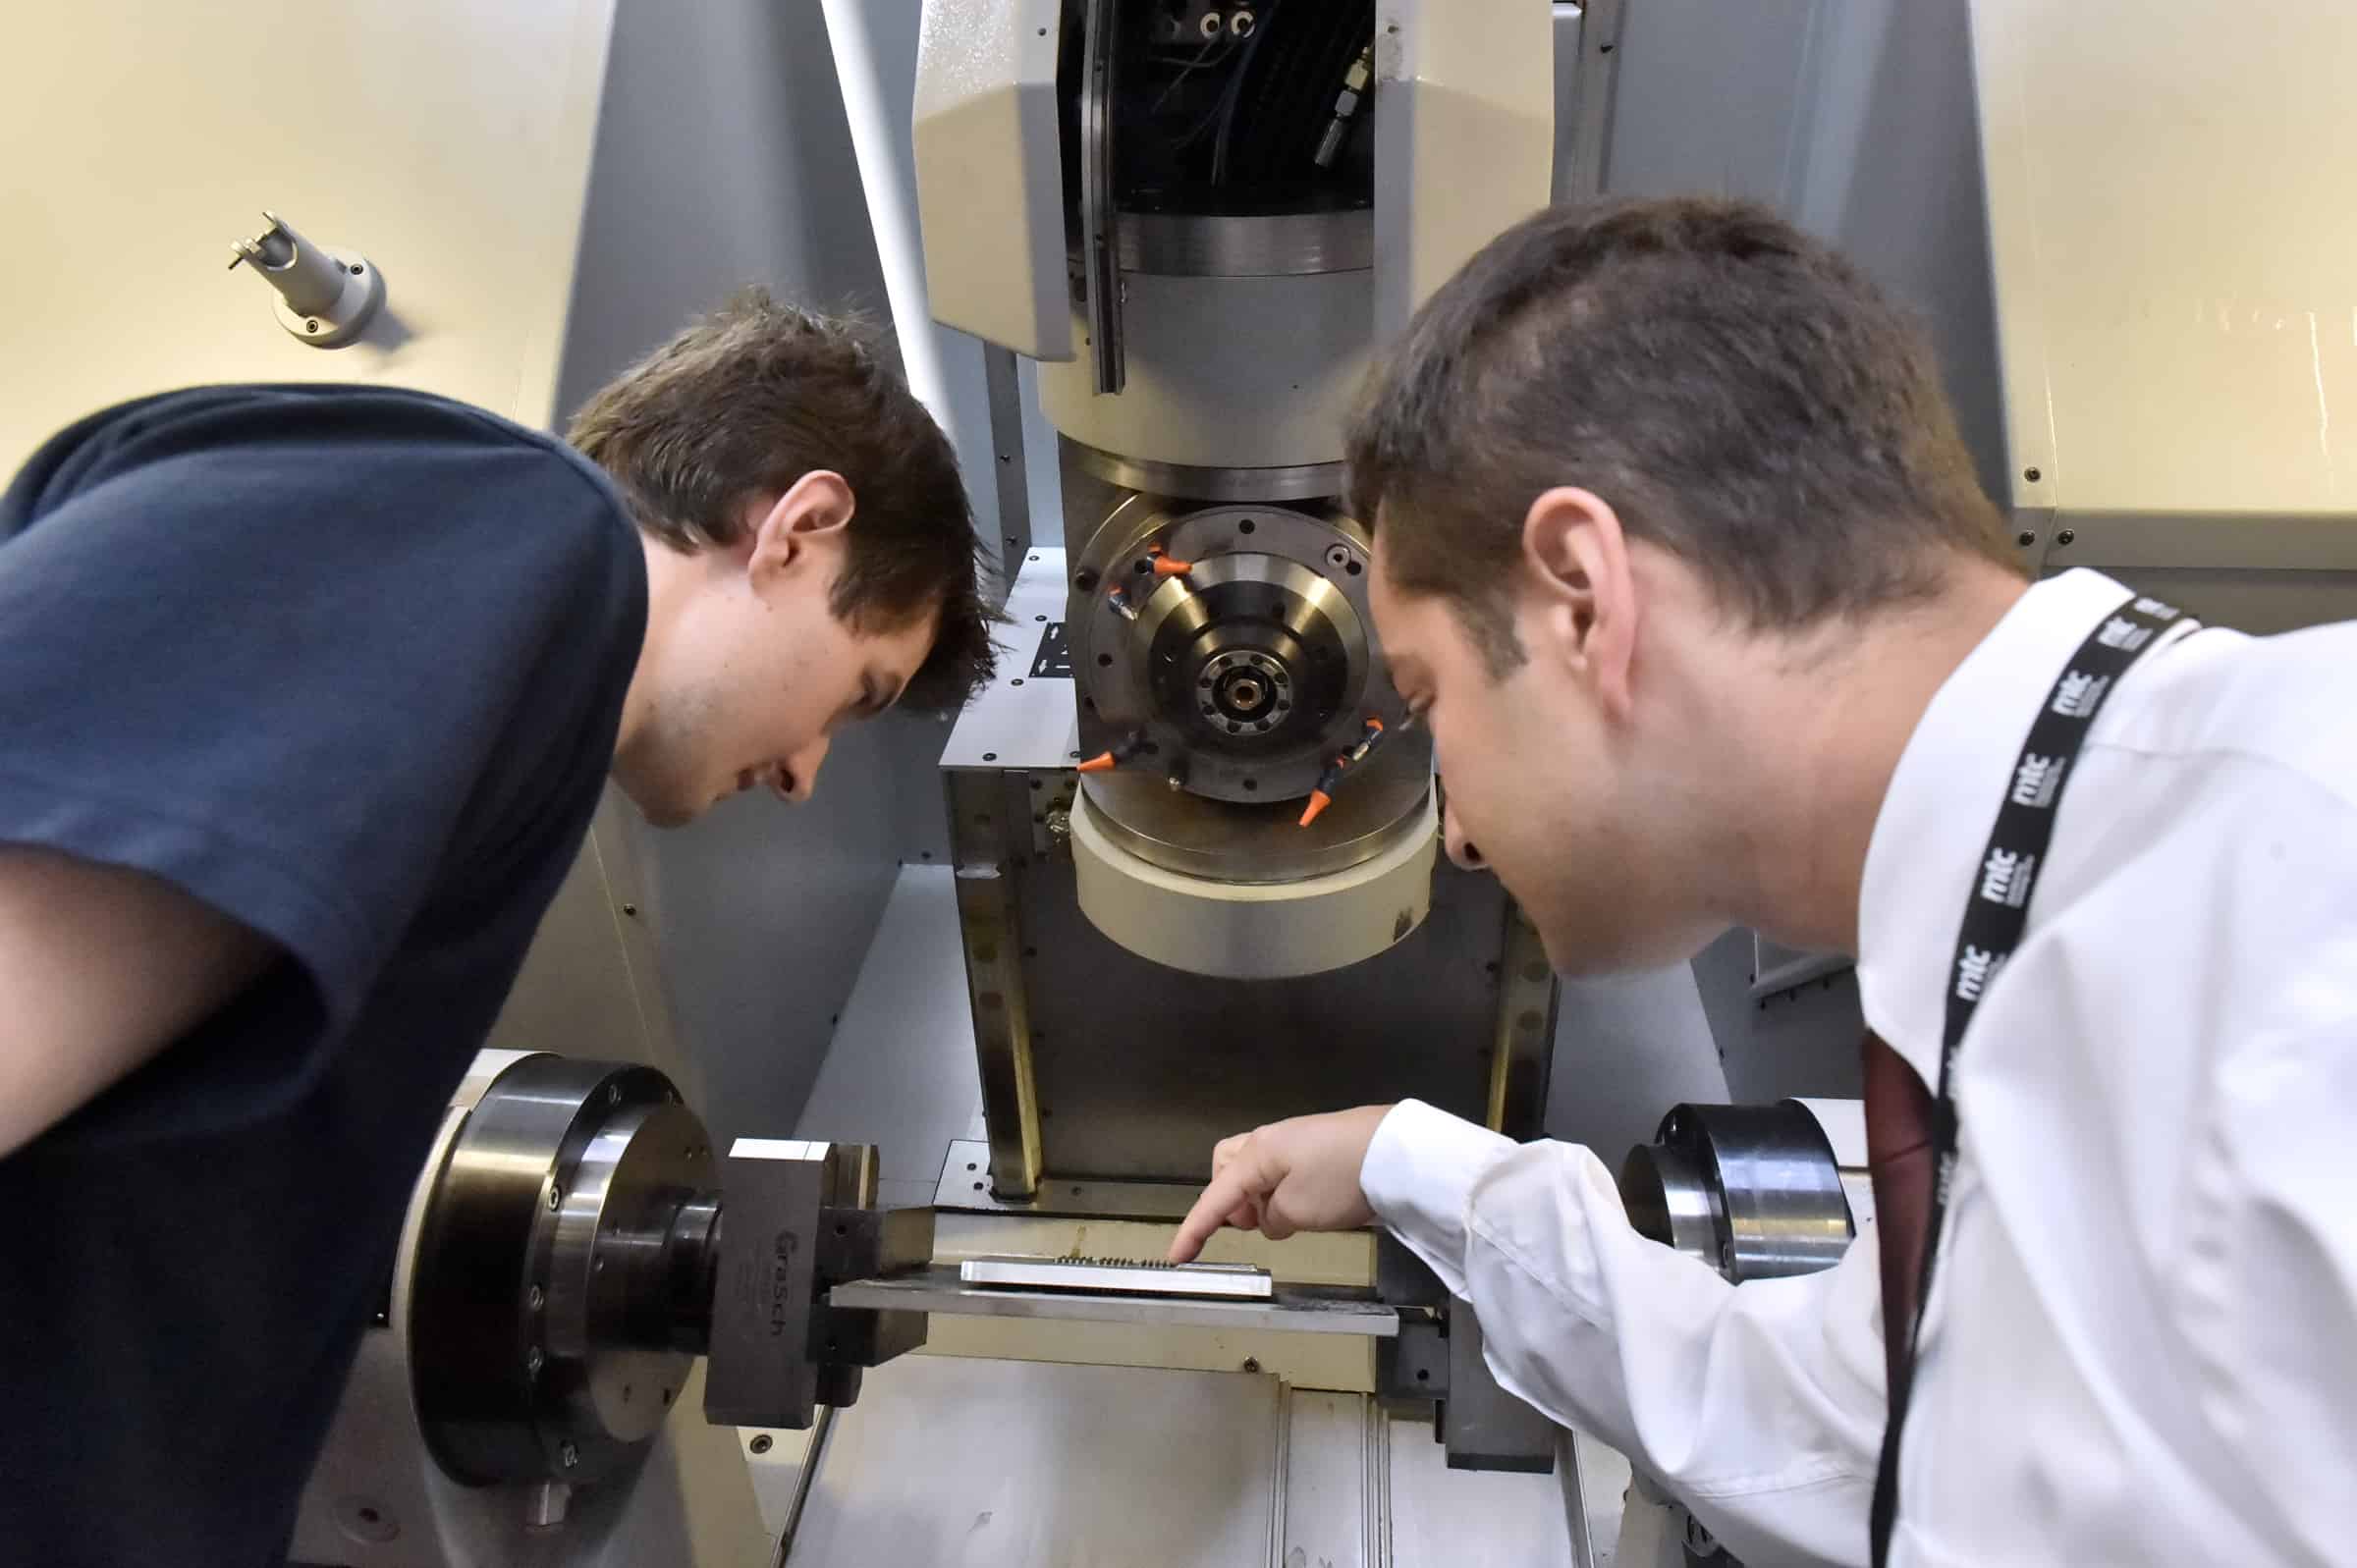 Additive advance: measurement helps additive techniques into manufacturing